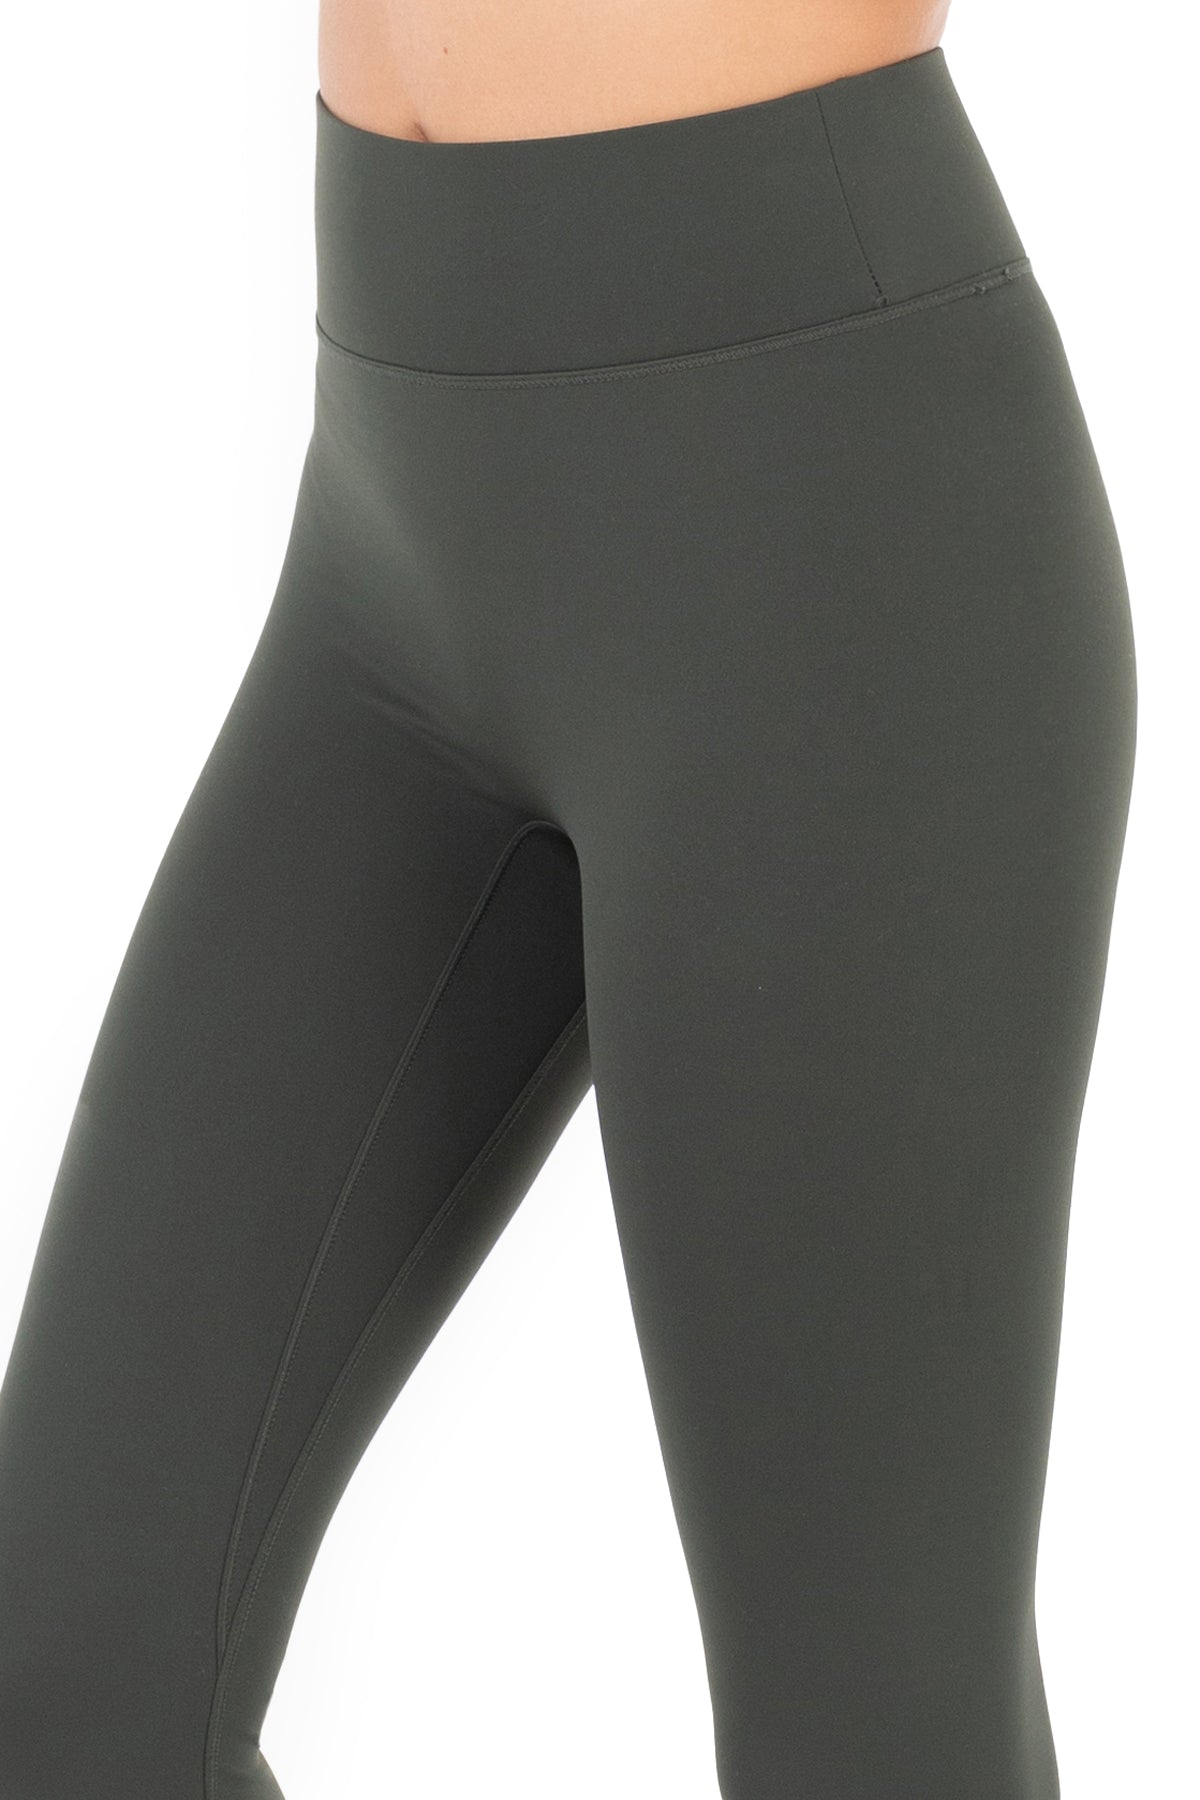 Kyodan Leggings - Black with Gray Accent